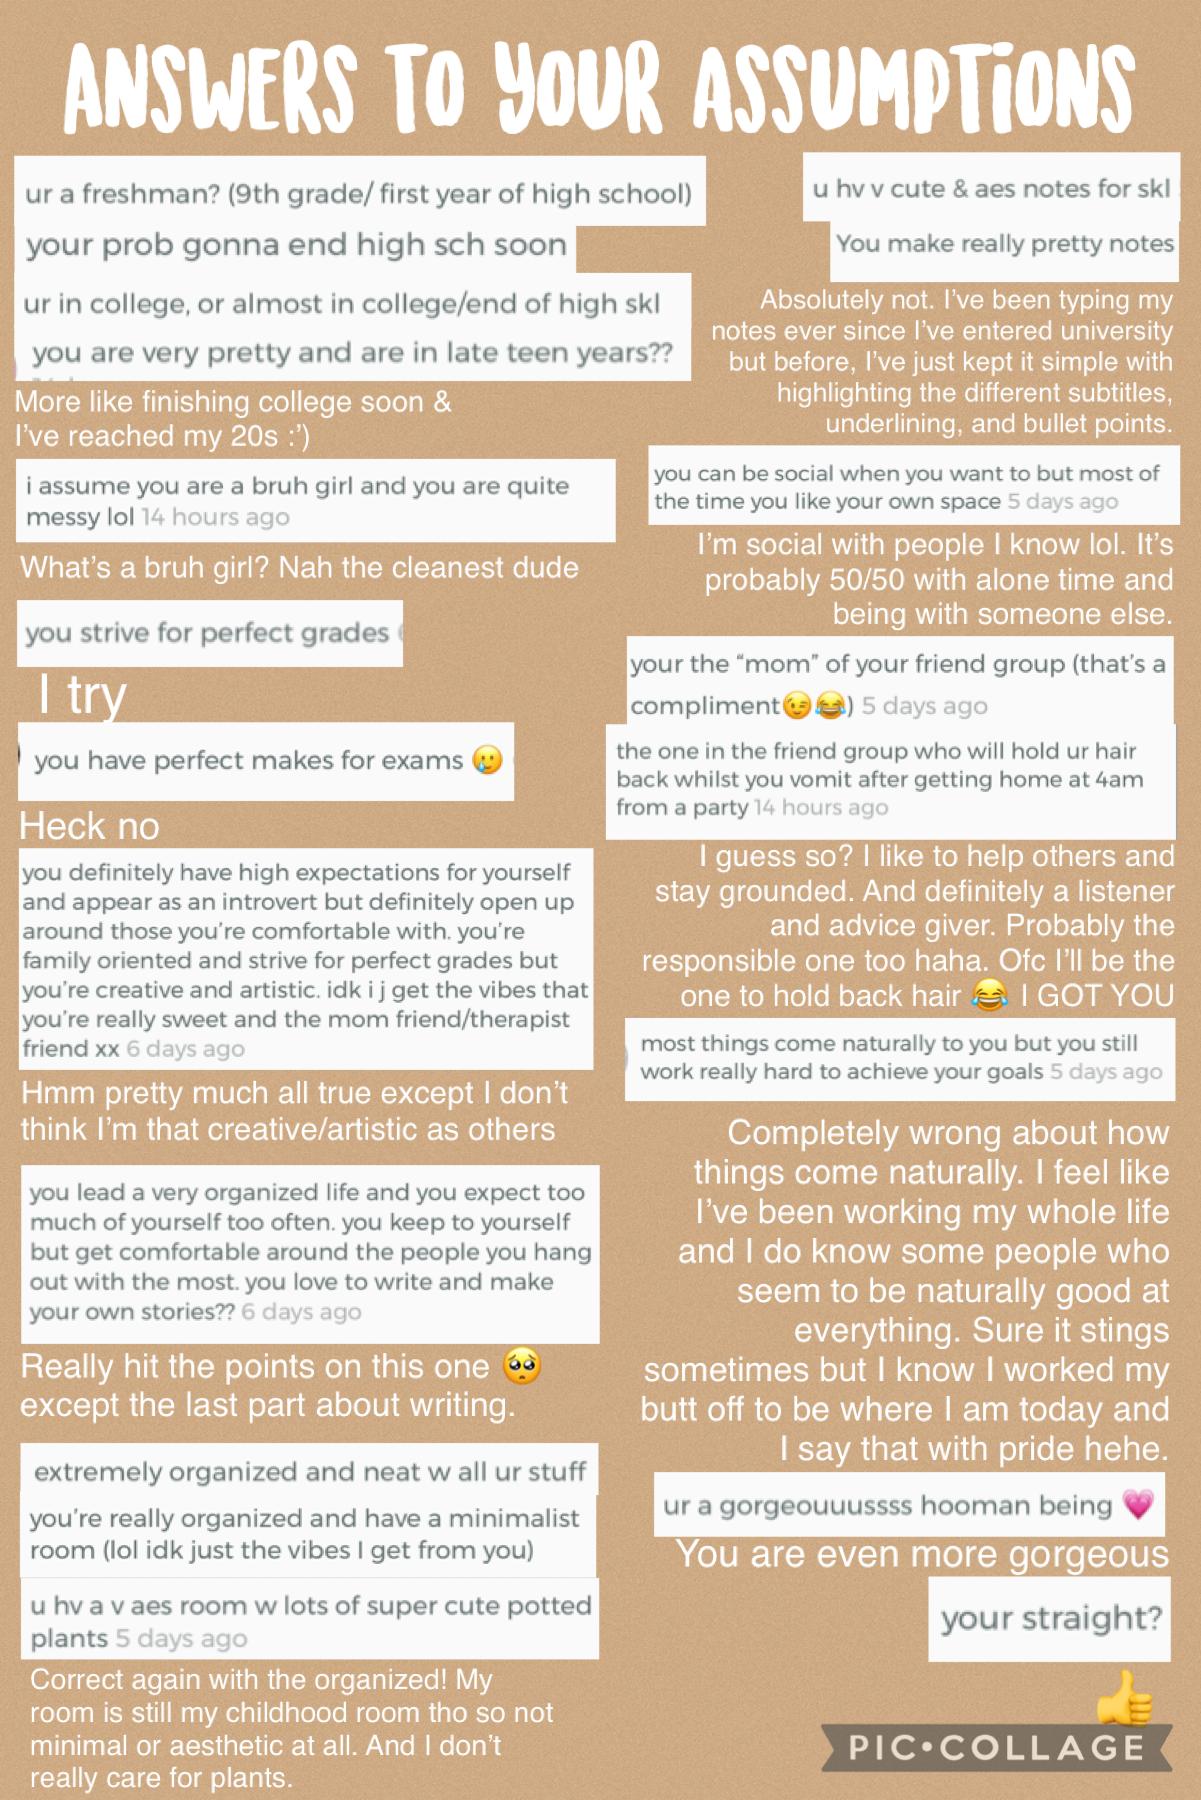 3/28/21 | Anything surprising? Anyways, thank you for your assumptions! They were fun to read! Took forever to squish it all together, I hope it’s not too hard to see. 